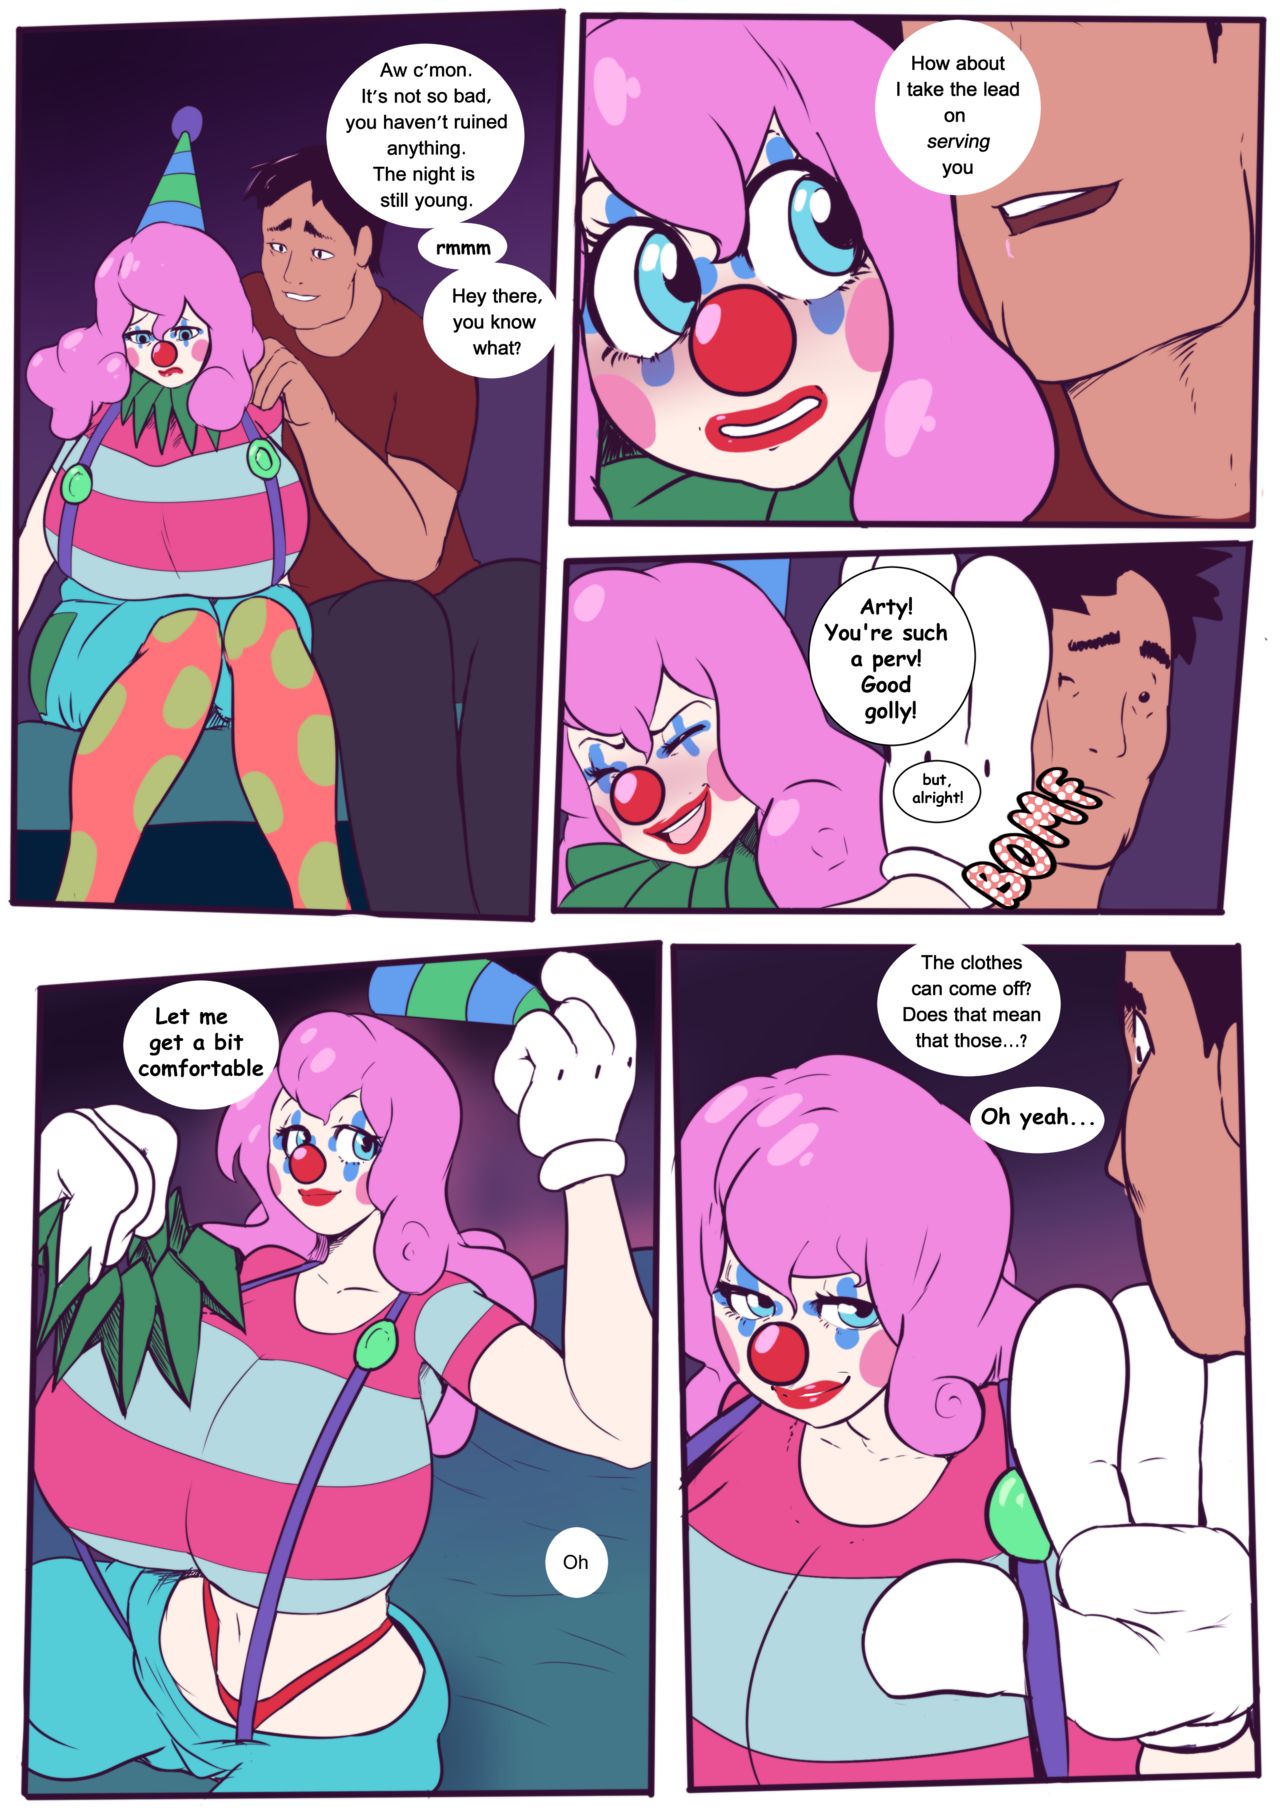 A Perfectly Normal Comic Where Nothing Weird Happens Lemonfont 18